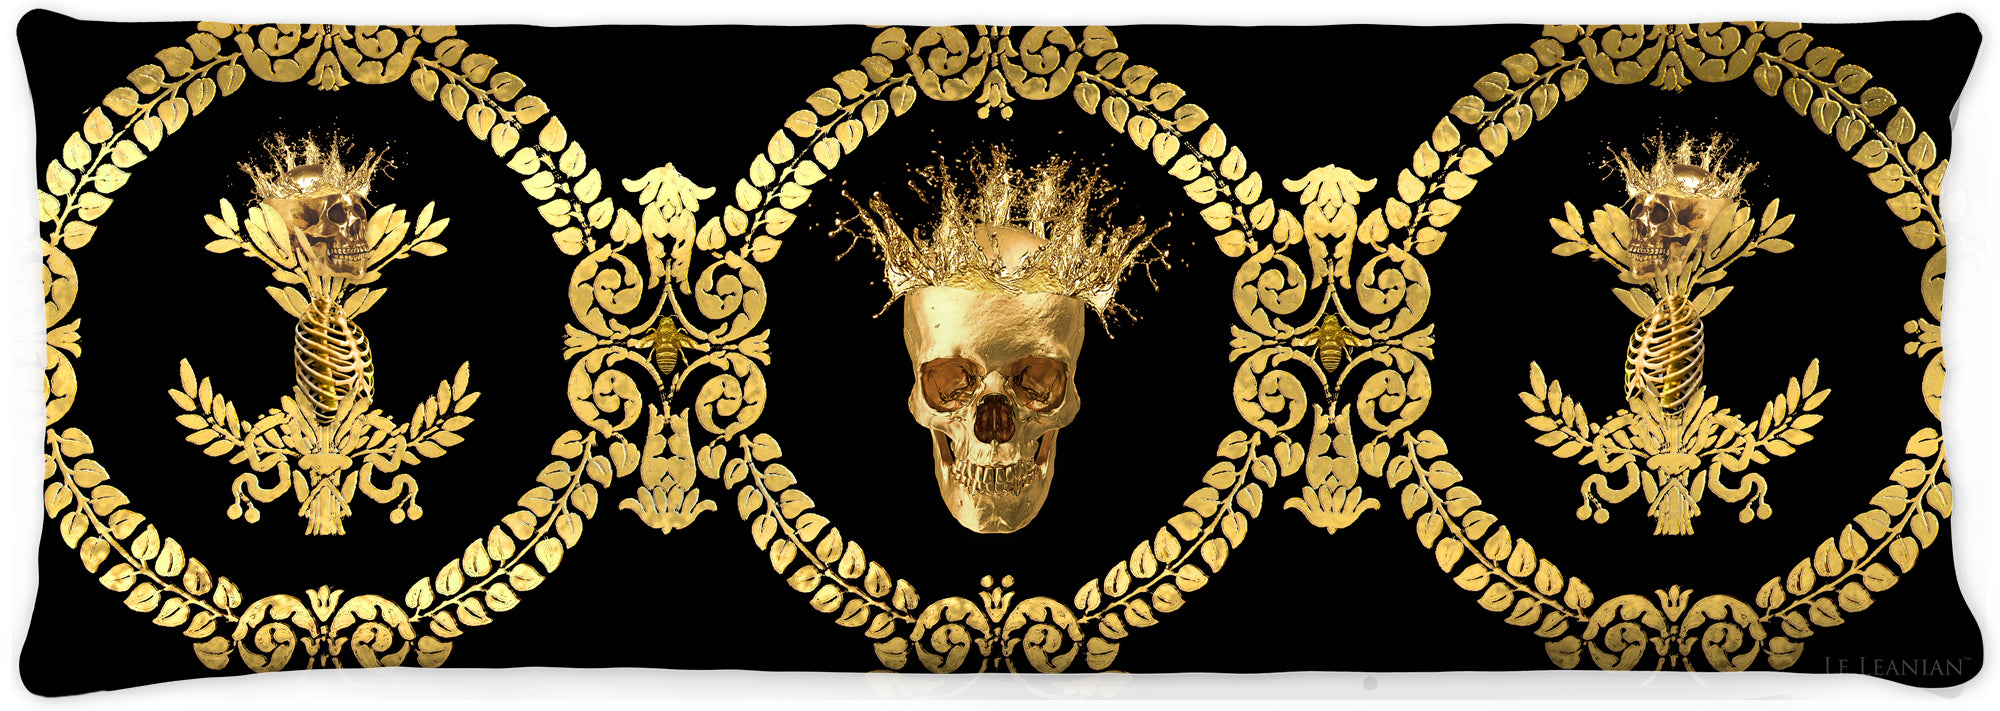 CROWN GOLD SKULL-GOLD RIBS-Body Pillow-PILLOW CASE- color BLACK